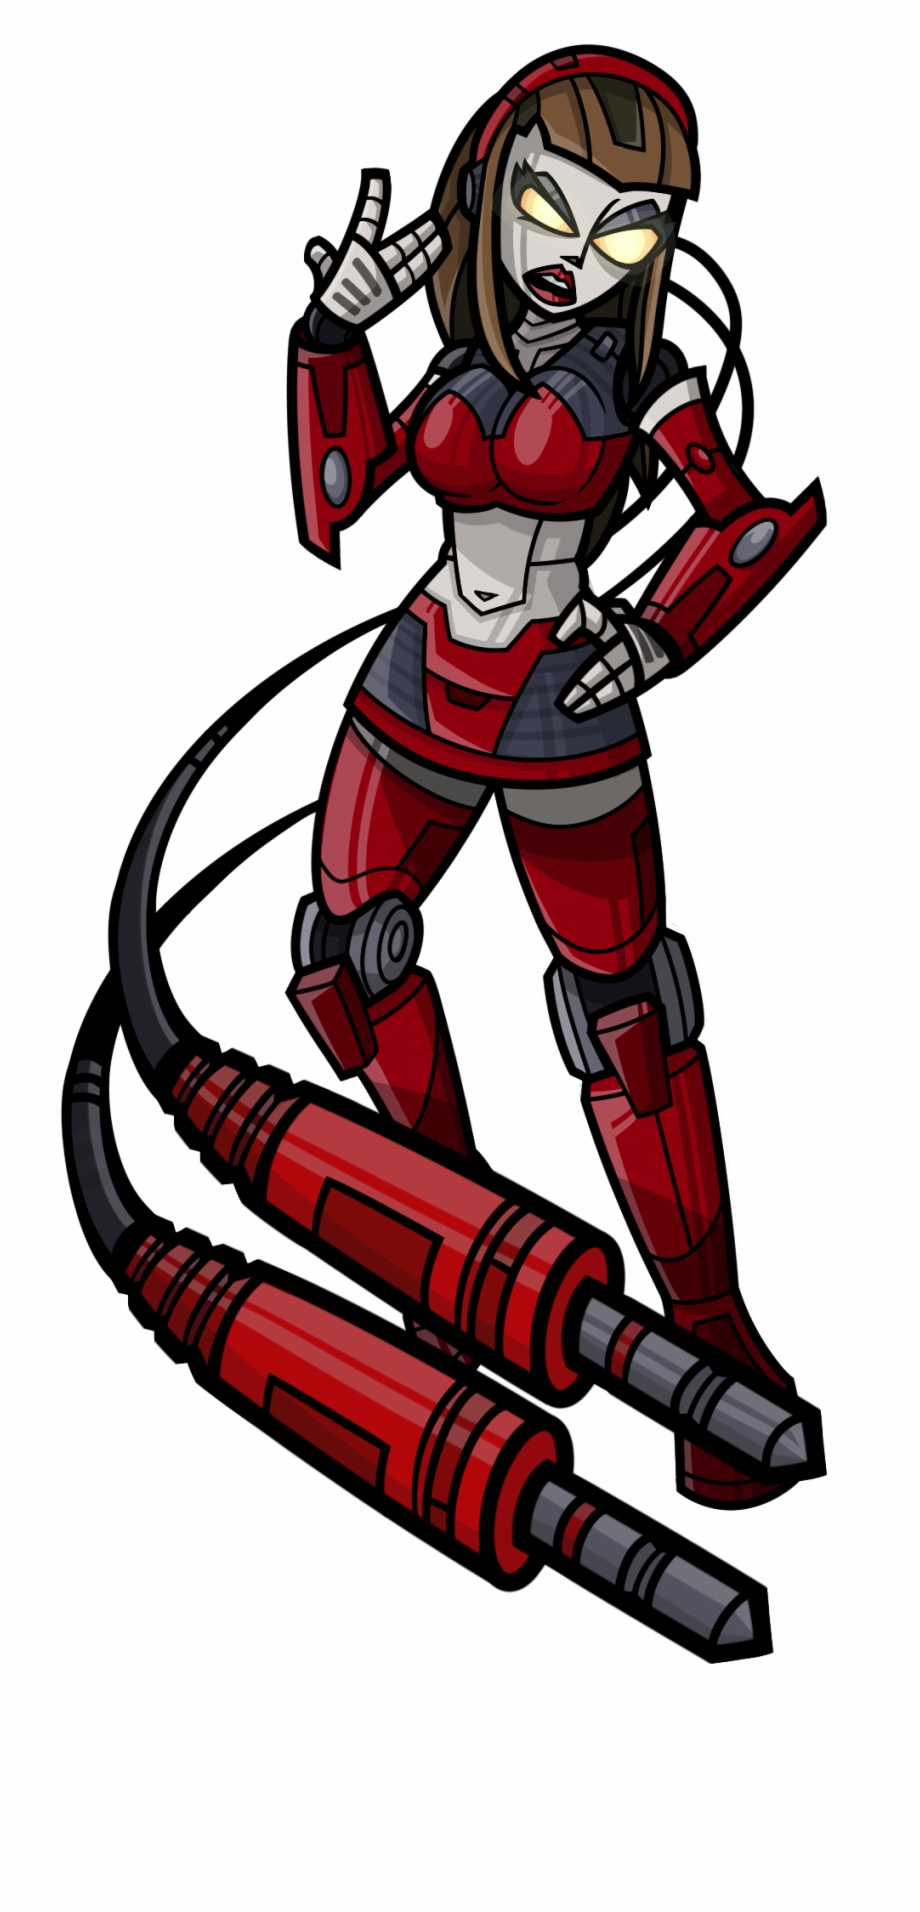 Heres Some Art Of Courtney Gears From Ratchet